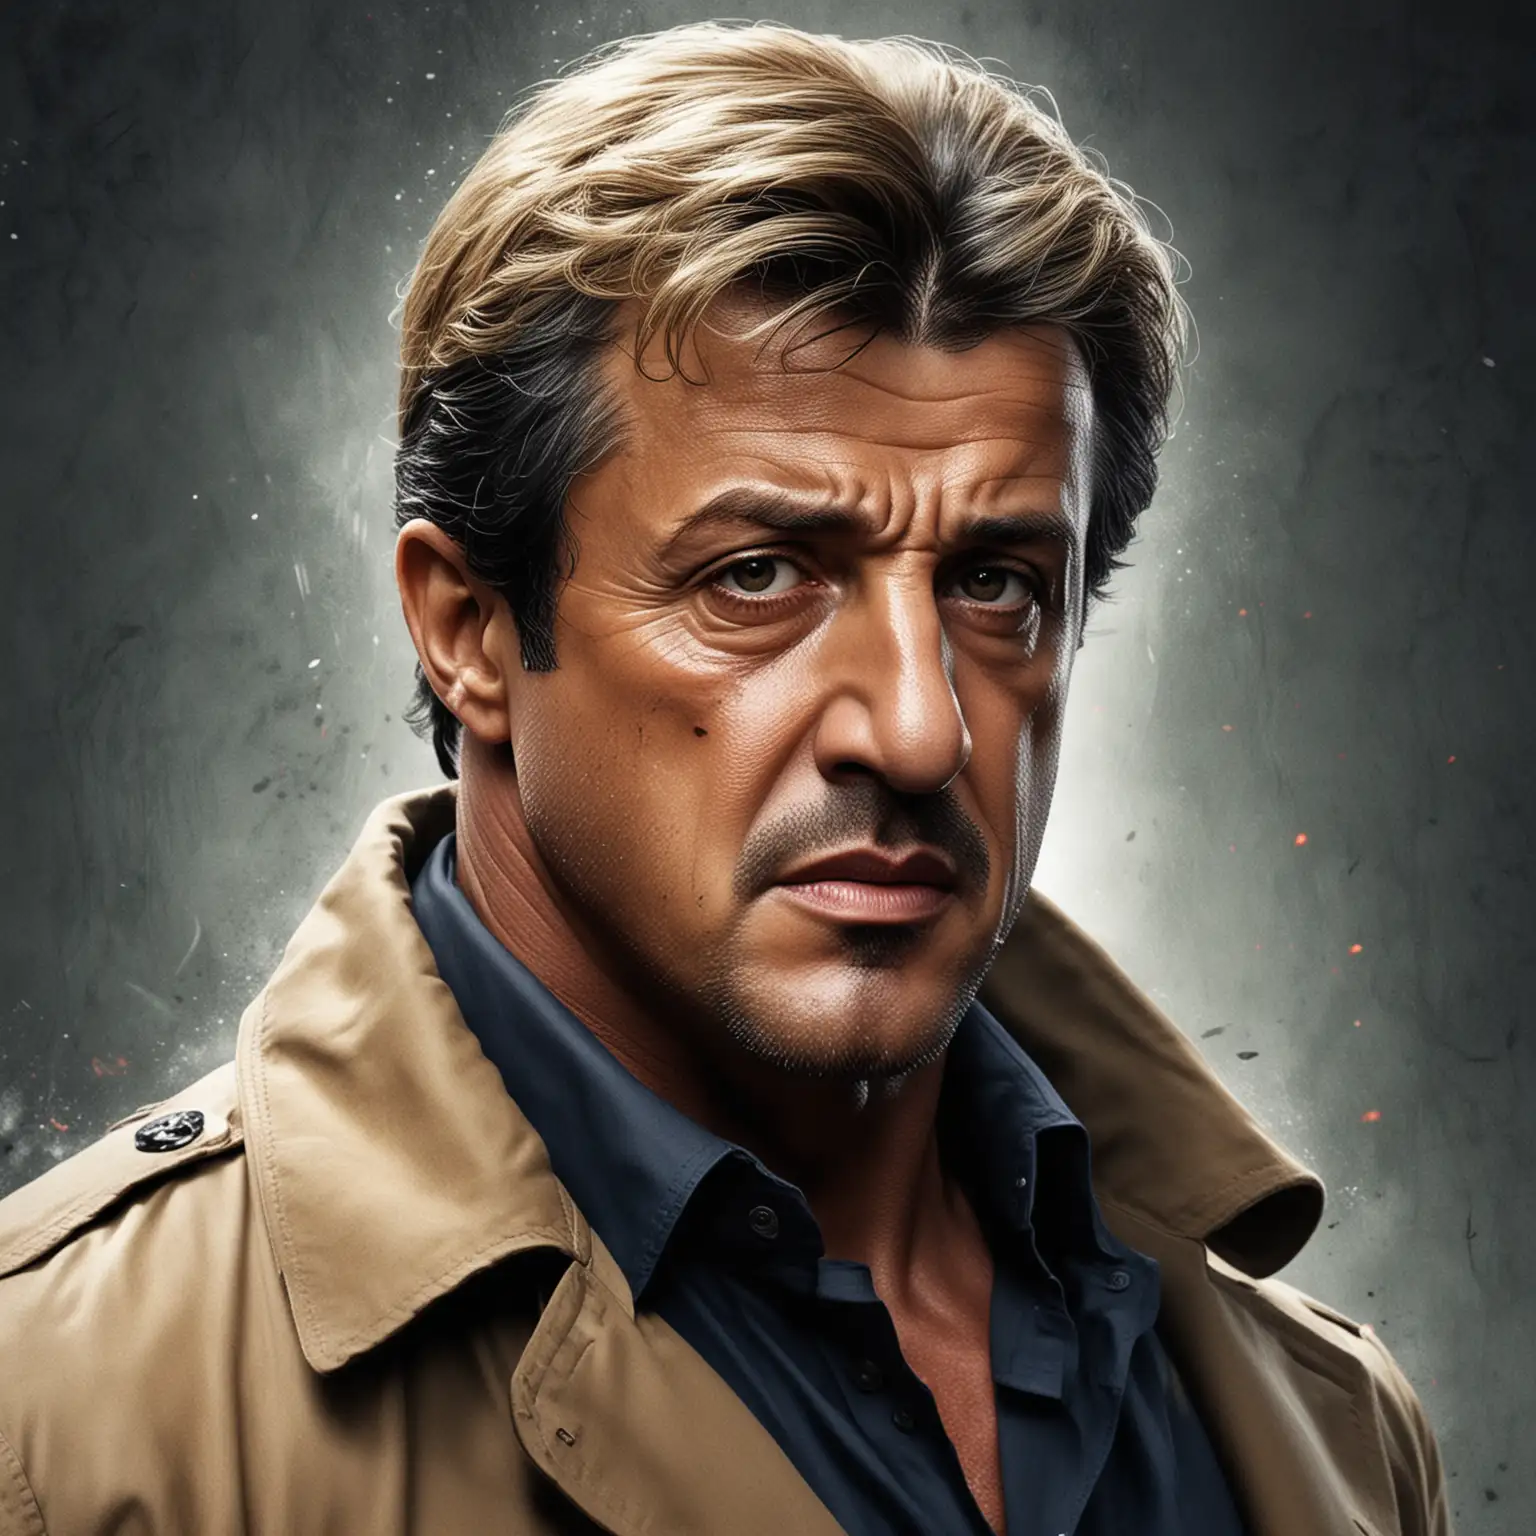 movie poster art style; sylvester stallone with blond hair as detective